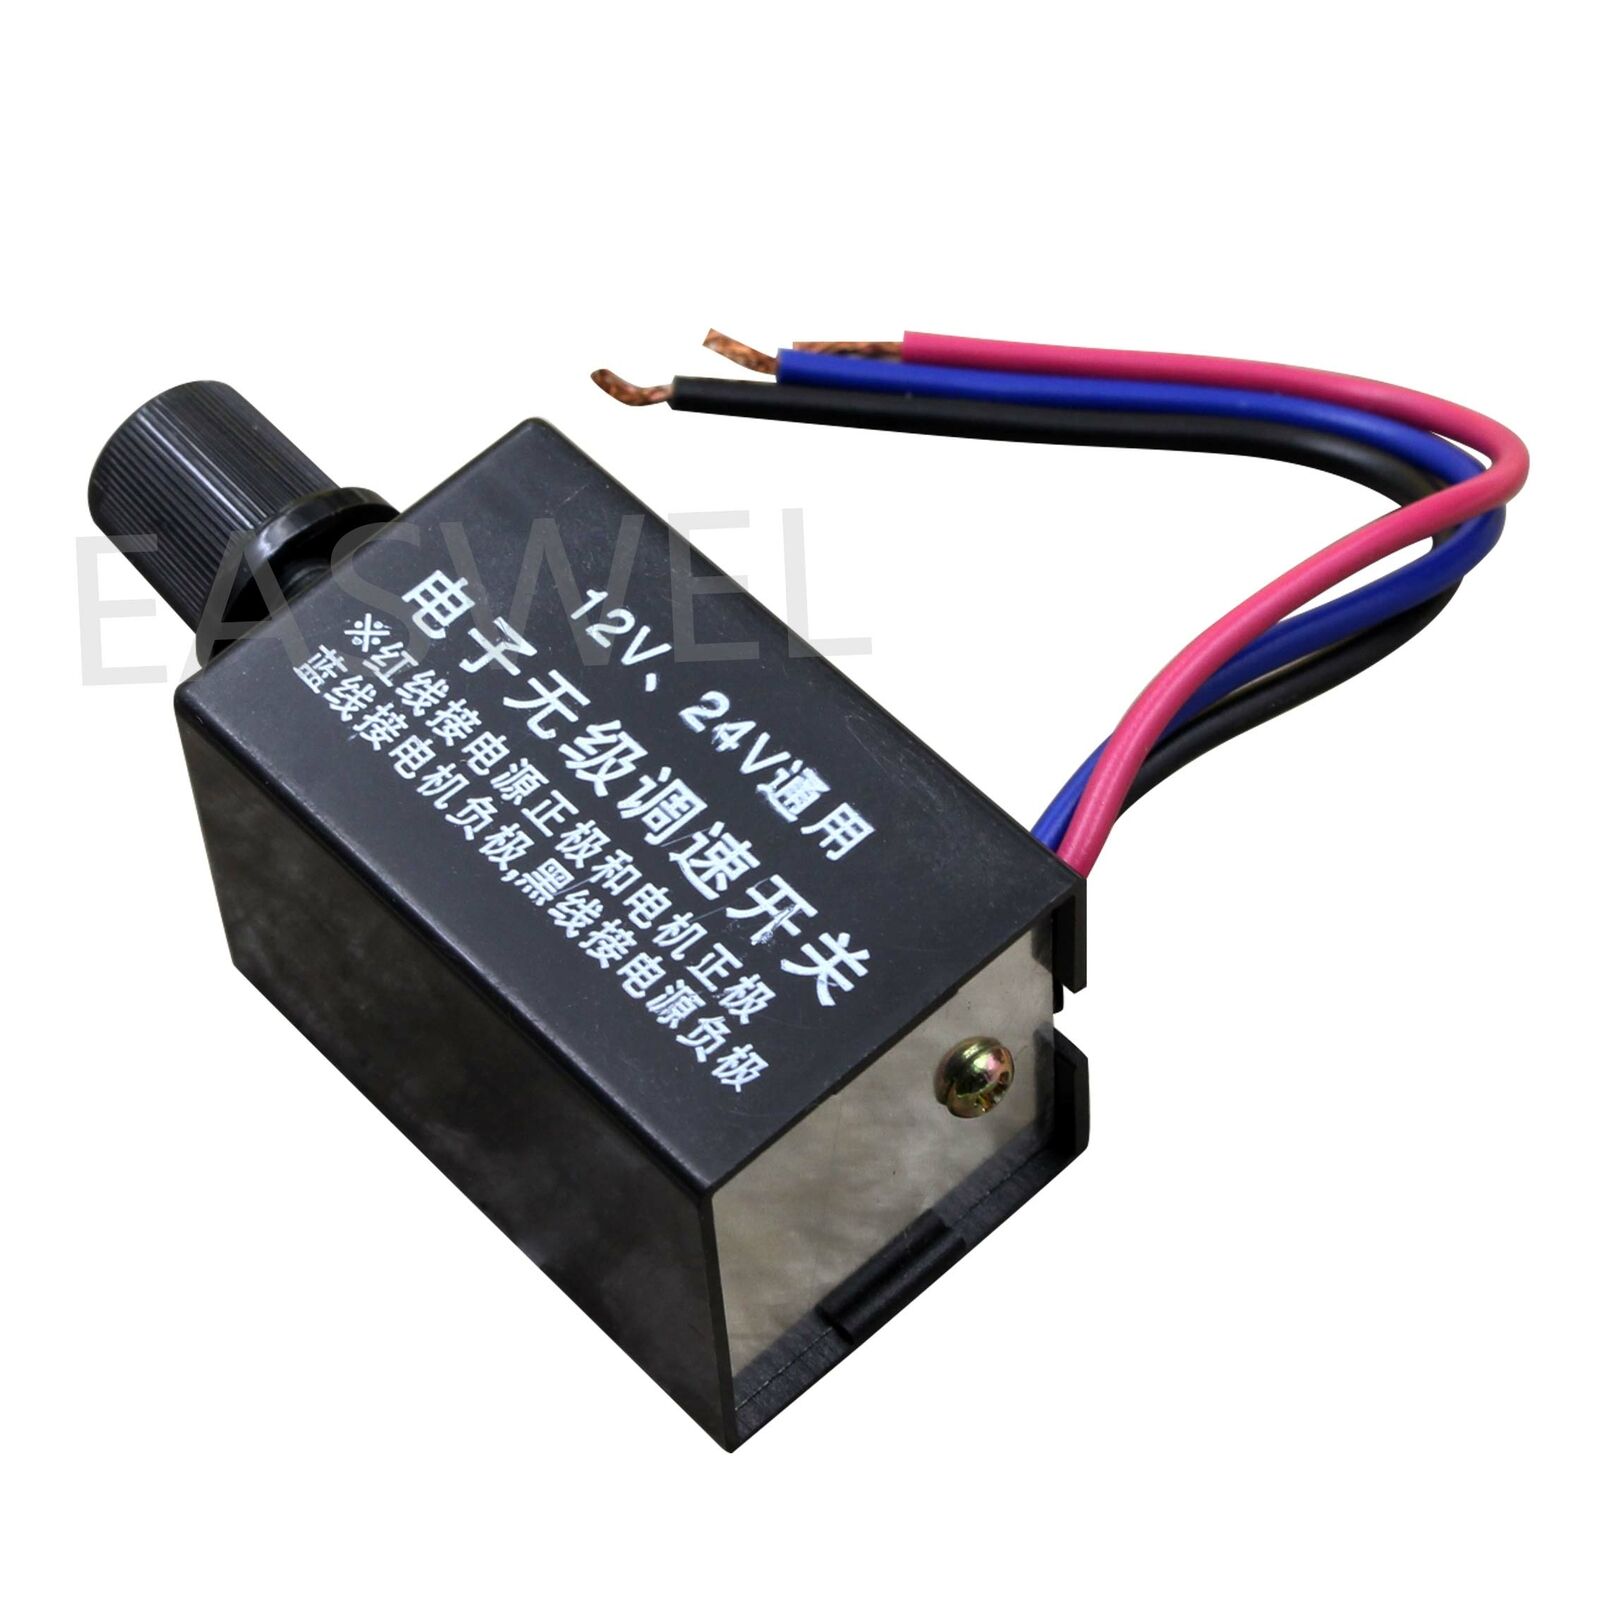 1pcs DC 12V 24V Motor Speed Controller Switch For Car Truck Fan Heater Control